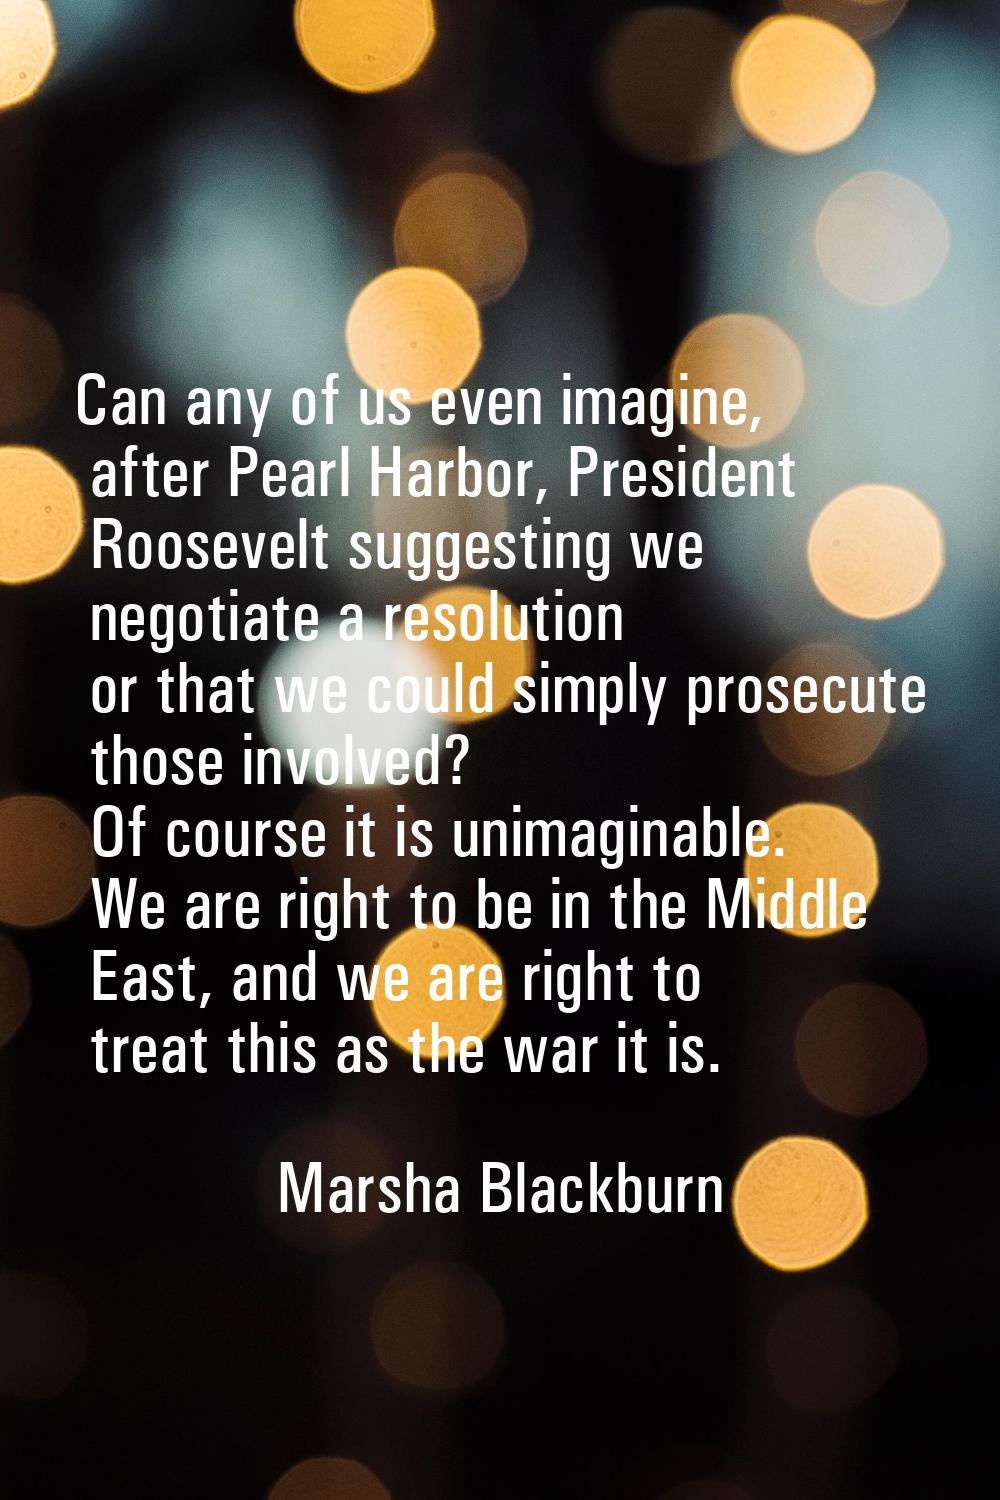 Can any of us even imagine, after Pearl Harbor, President Roosevelt suggesting we negotiate a resol